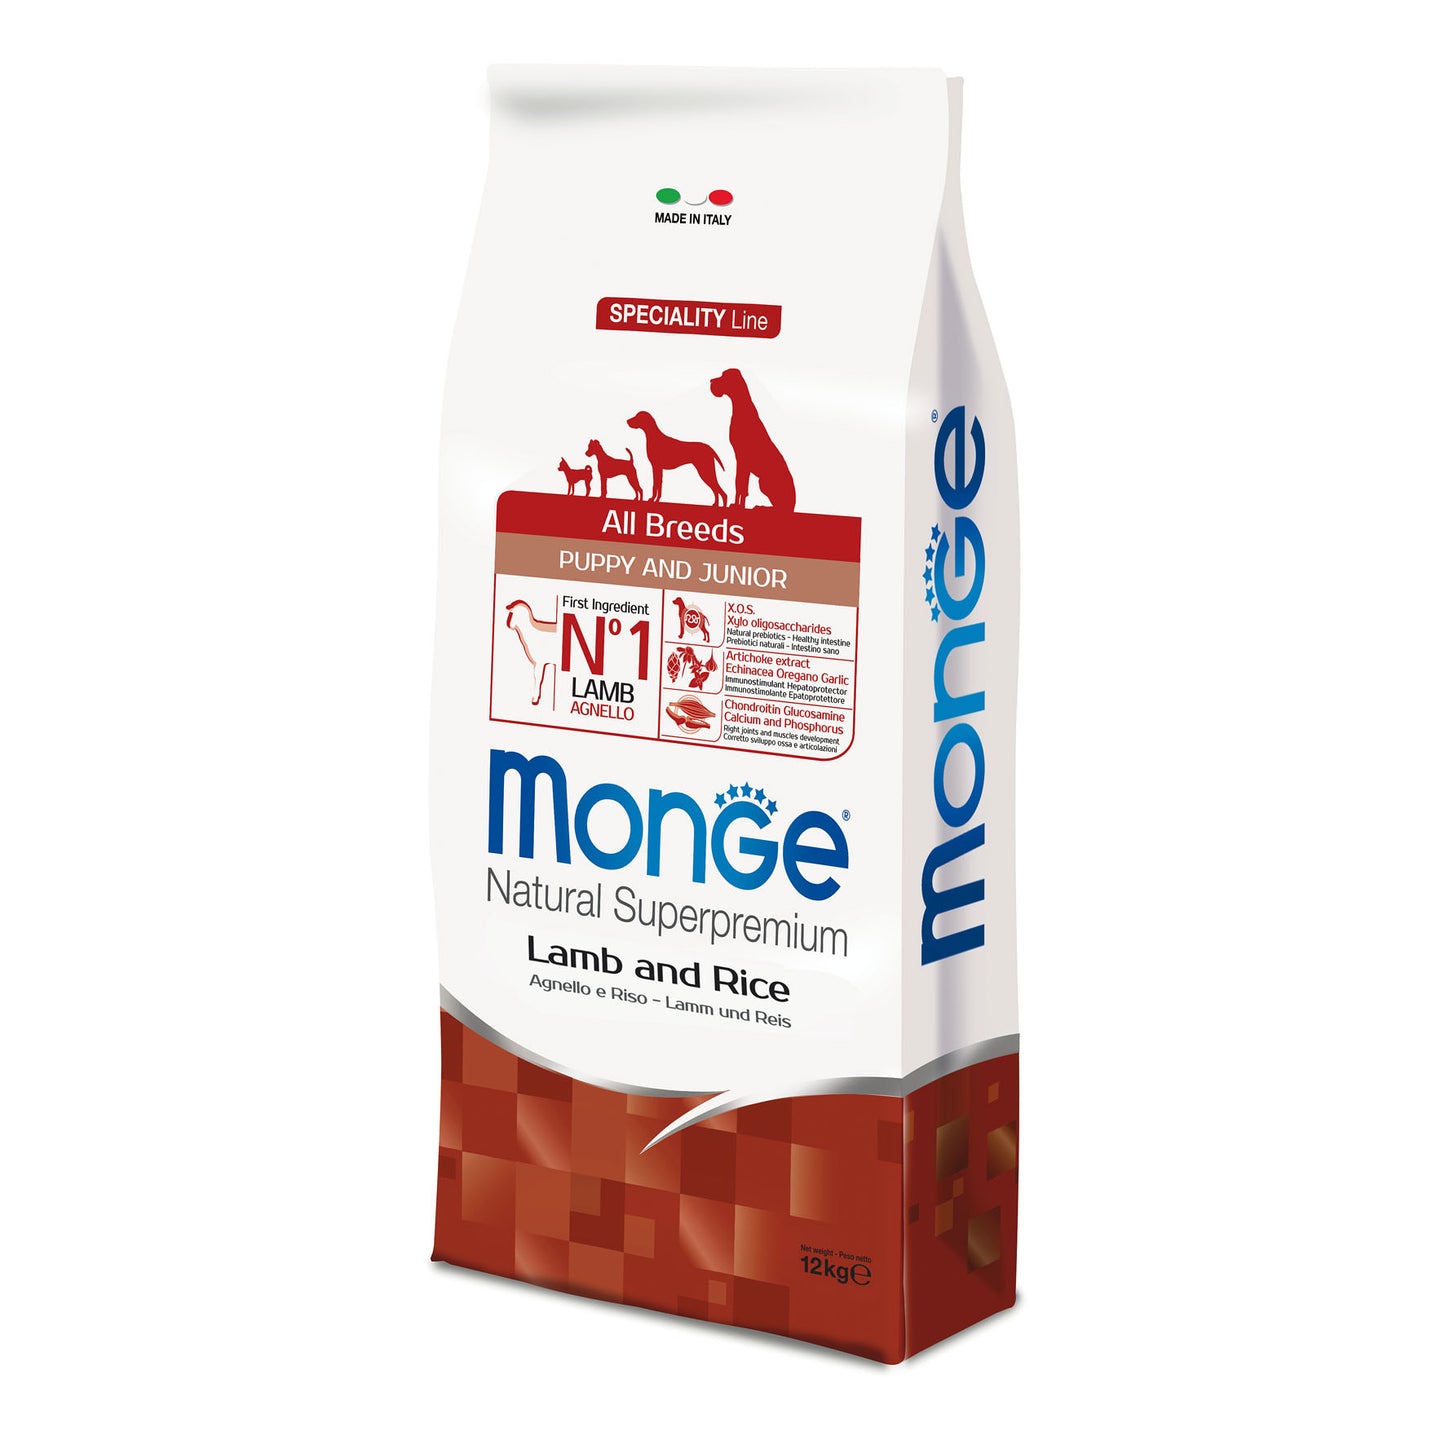 Monge Dog - SPECIALITY Line - Monoprotein - Puppy & Junior ALL BREEDS Lamb